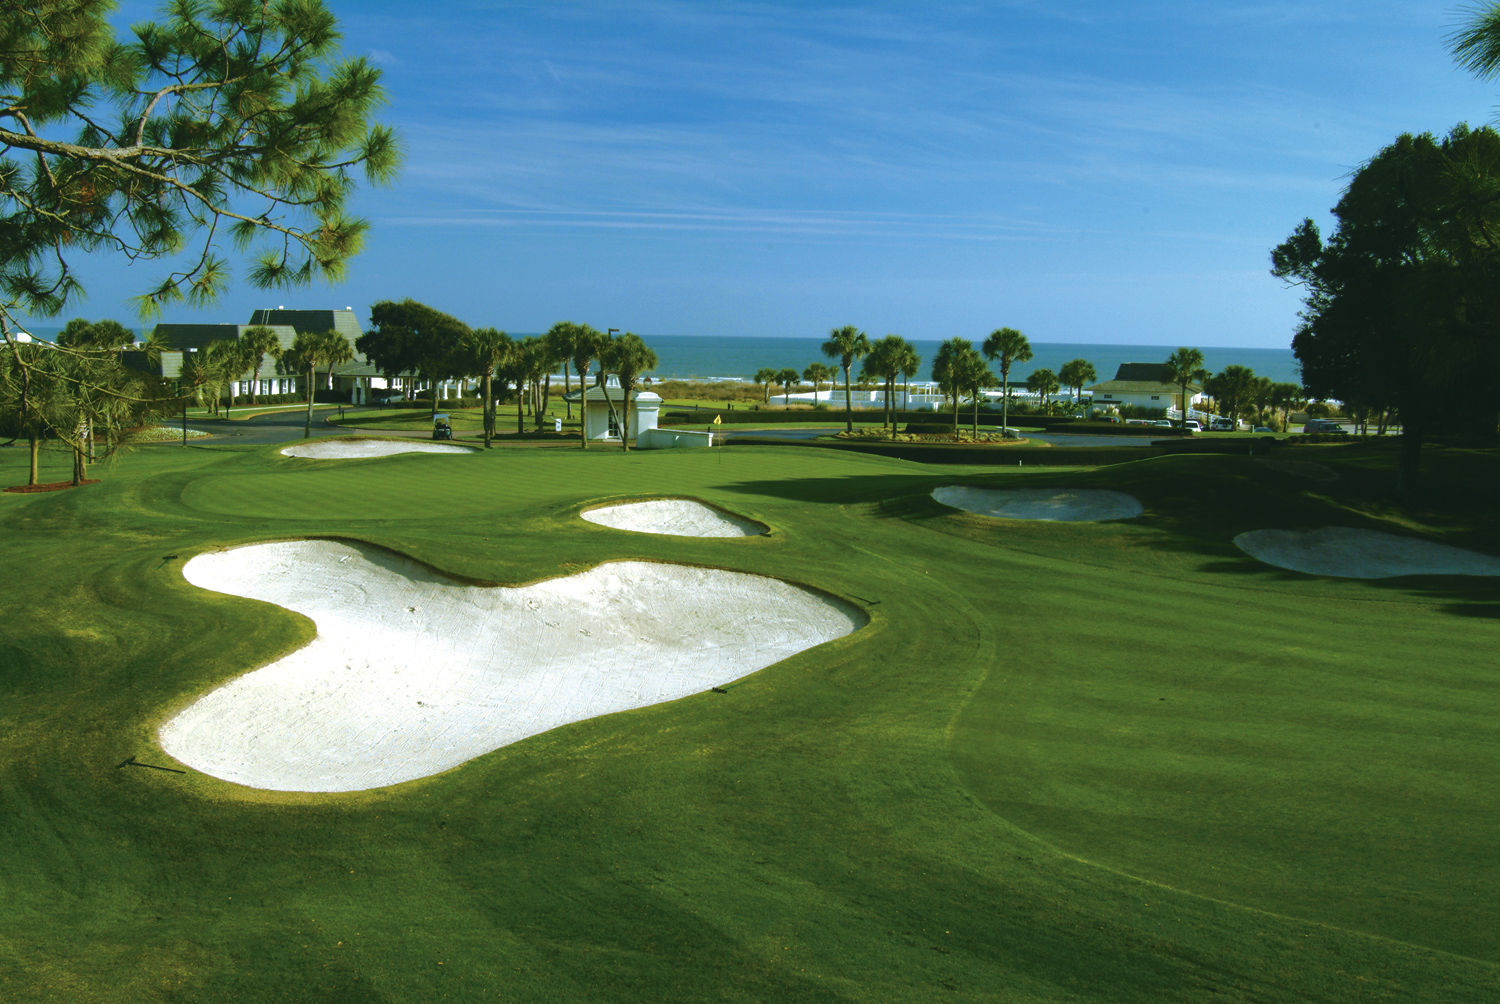 Top Tips for visiting Myrtle Beach for Golf